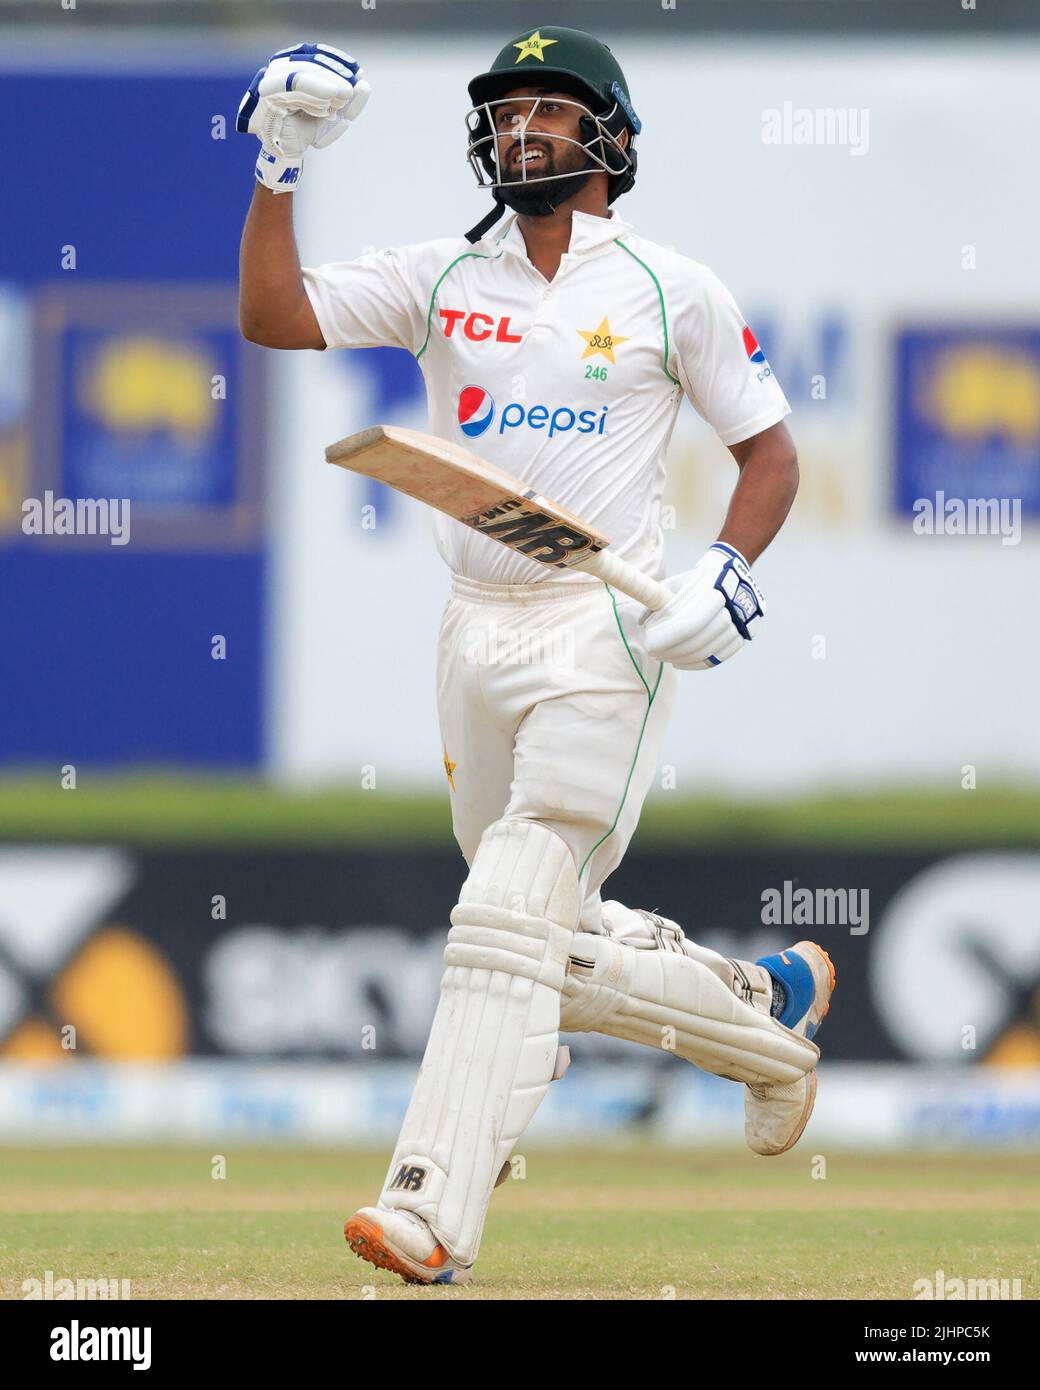 Galle, Sri Lanka. 20th July 2022. Pakistan's Abdullah Shafique celebrates the winning runs during the 5th day of the 1st test cricket match between Sri Lanka vs Pakistan at the Galle International Cricket Stadium in Galle on 20th July, 2022. Viraj Kothalwala/Alamy Live News Stock Photo